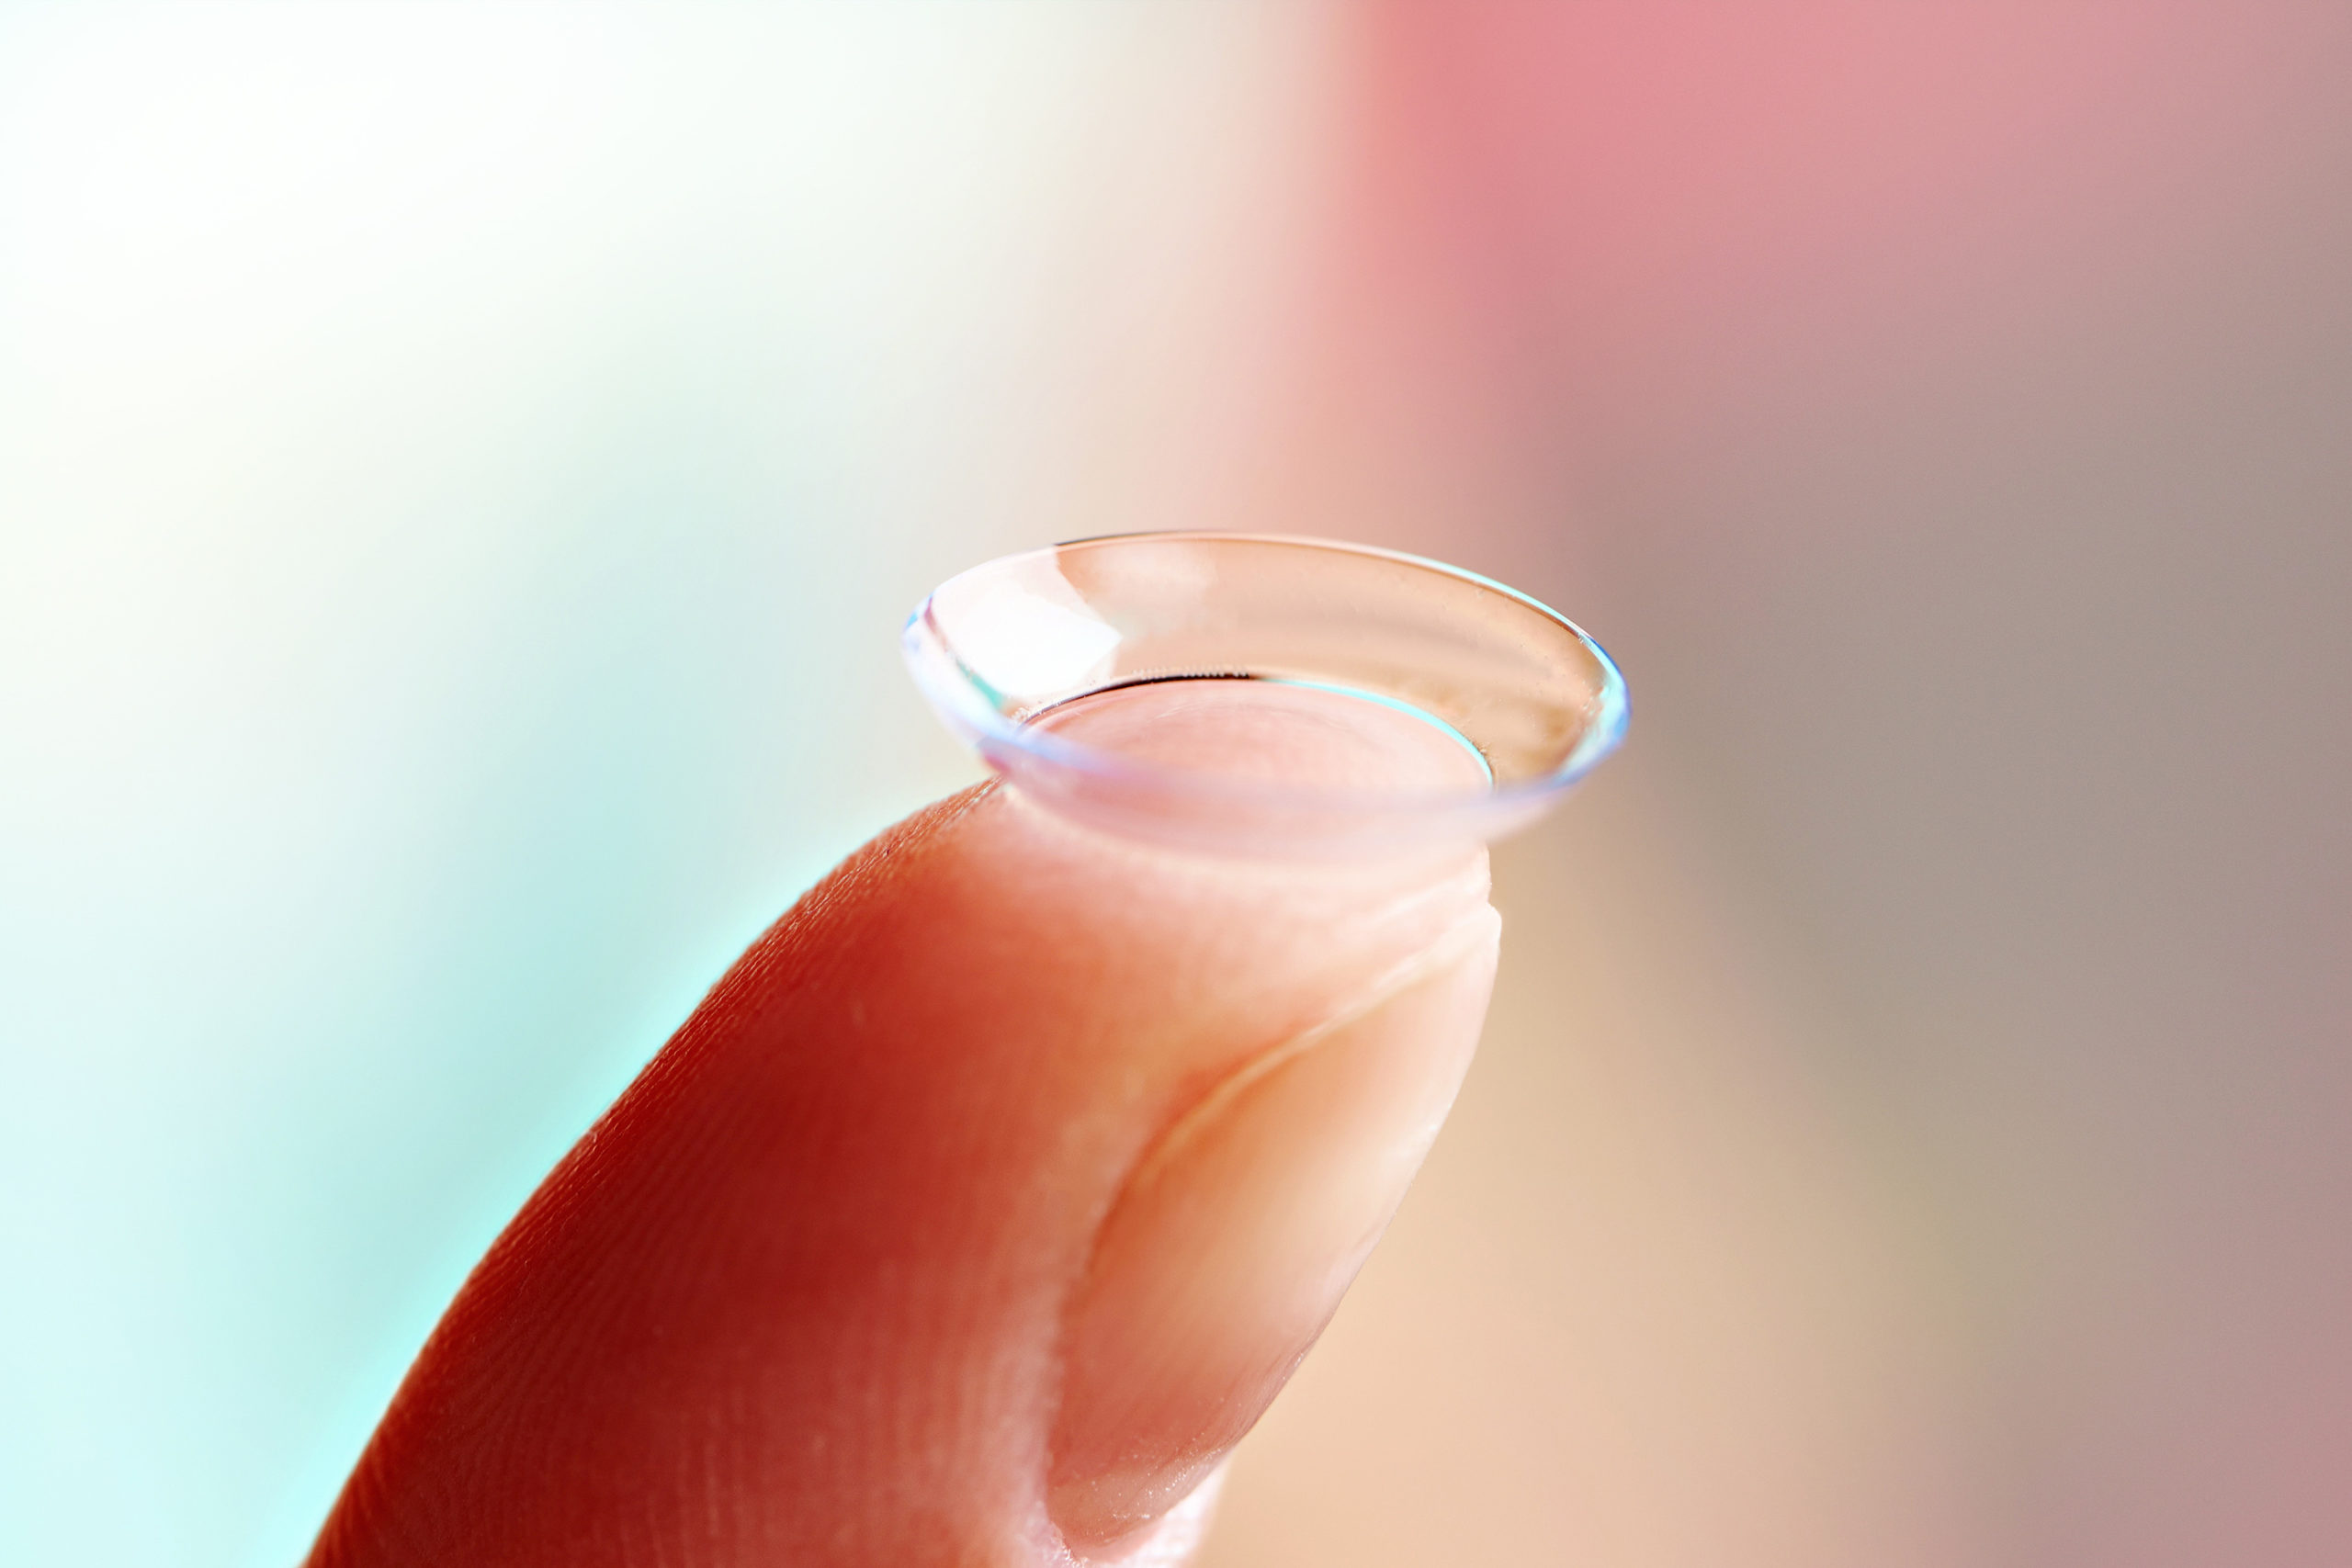 Types Of Contact Lenses Dr Morris The Eye Center